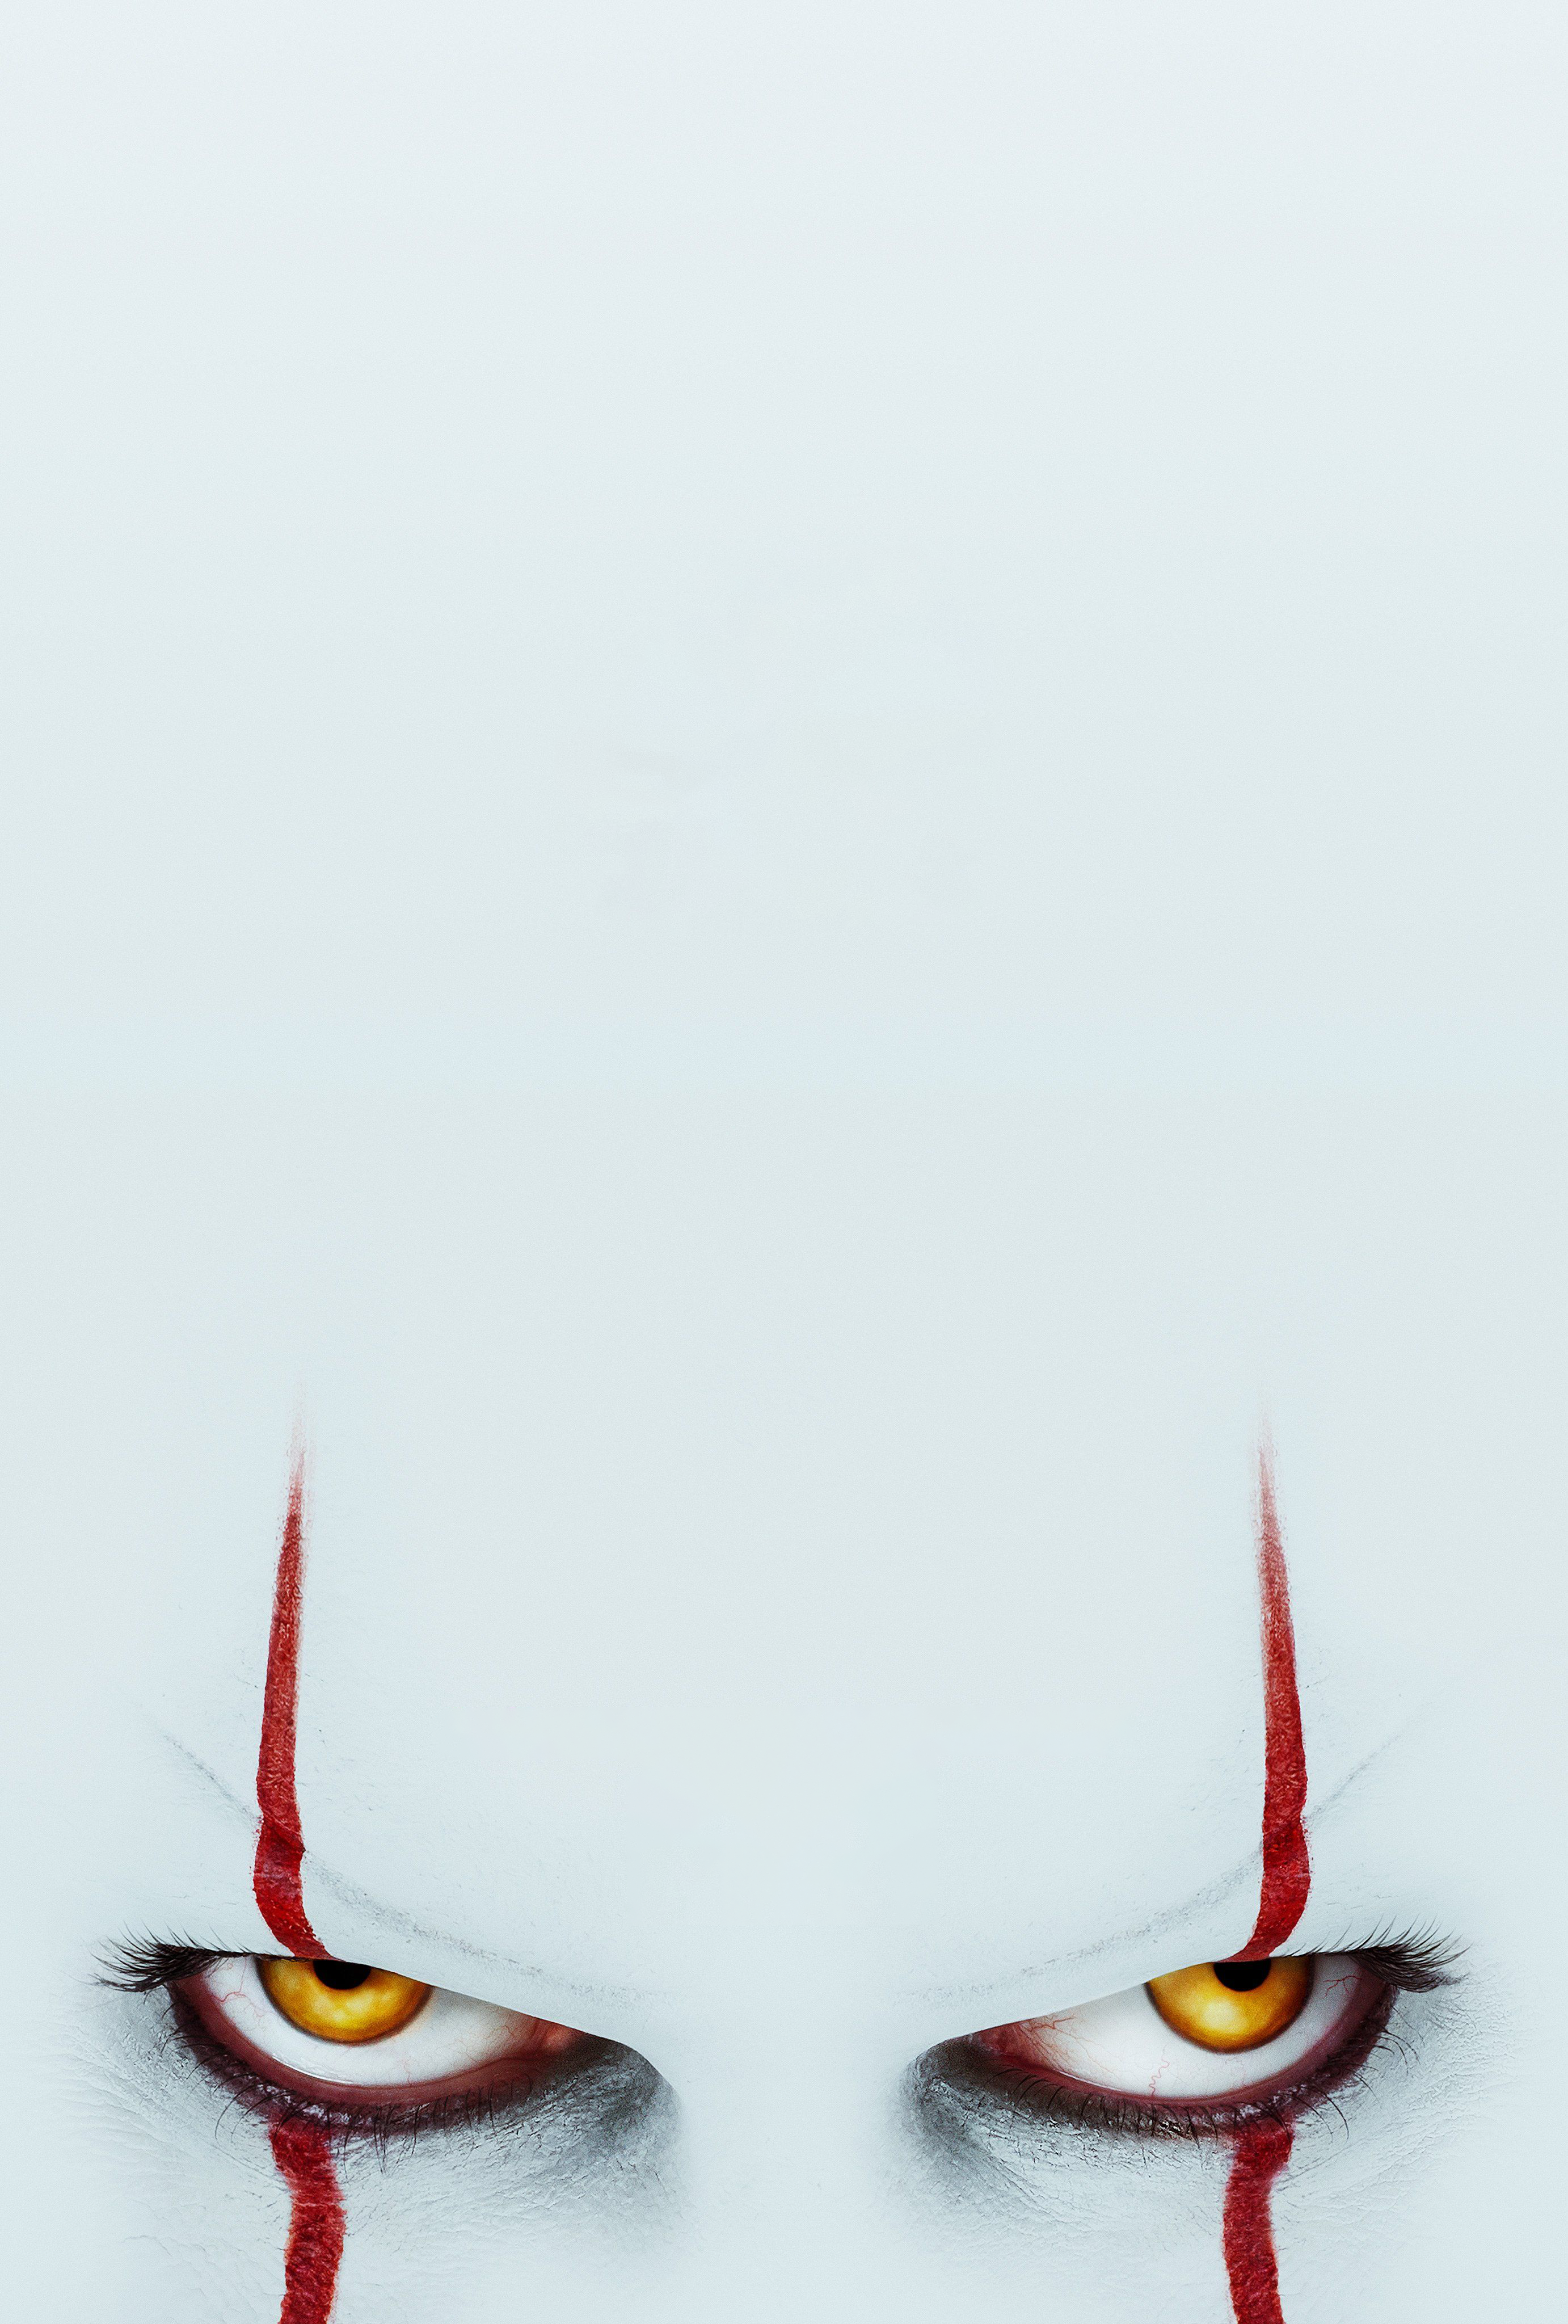 Here's a super high quality It: Chapter Two poster with no text